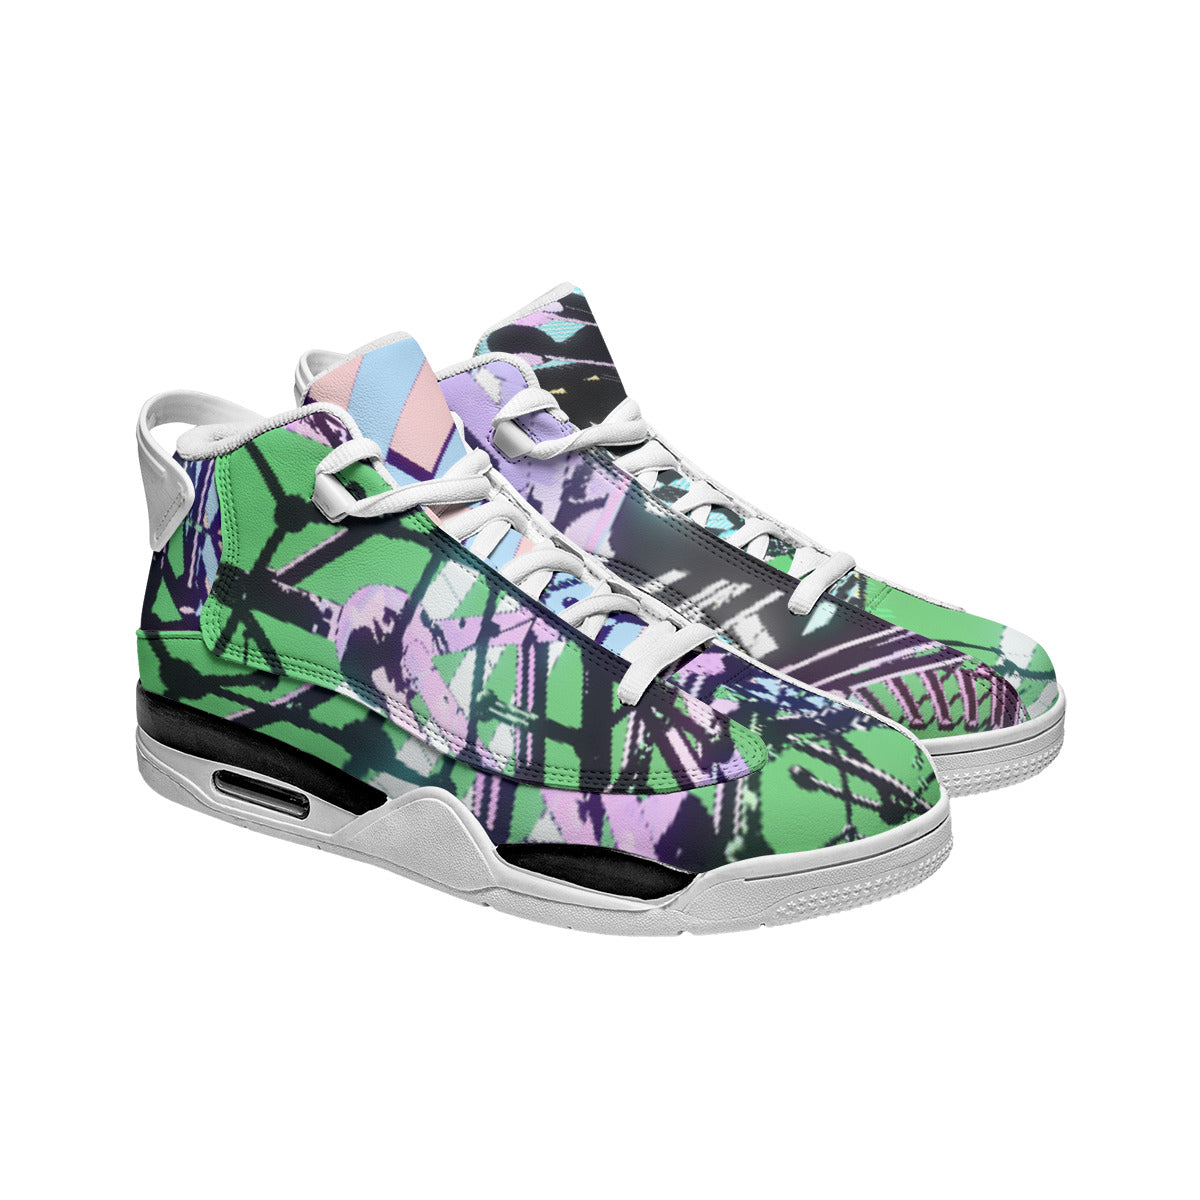 Psychedelic MicrodoseVR Men's Shock Absorption and Non-Slip Basketball Shoes